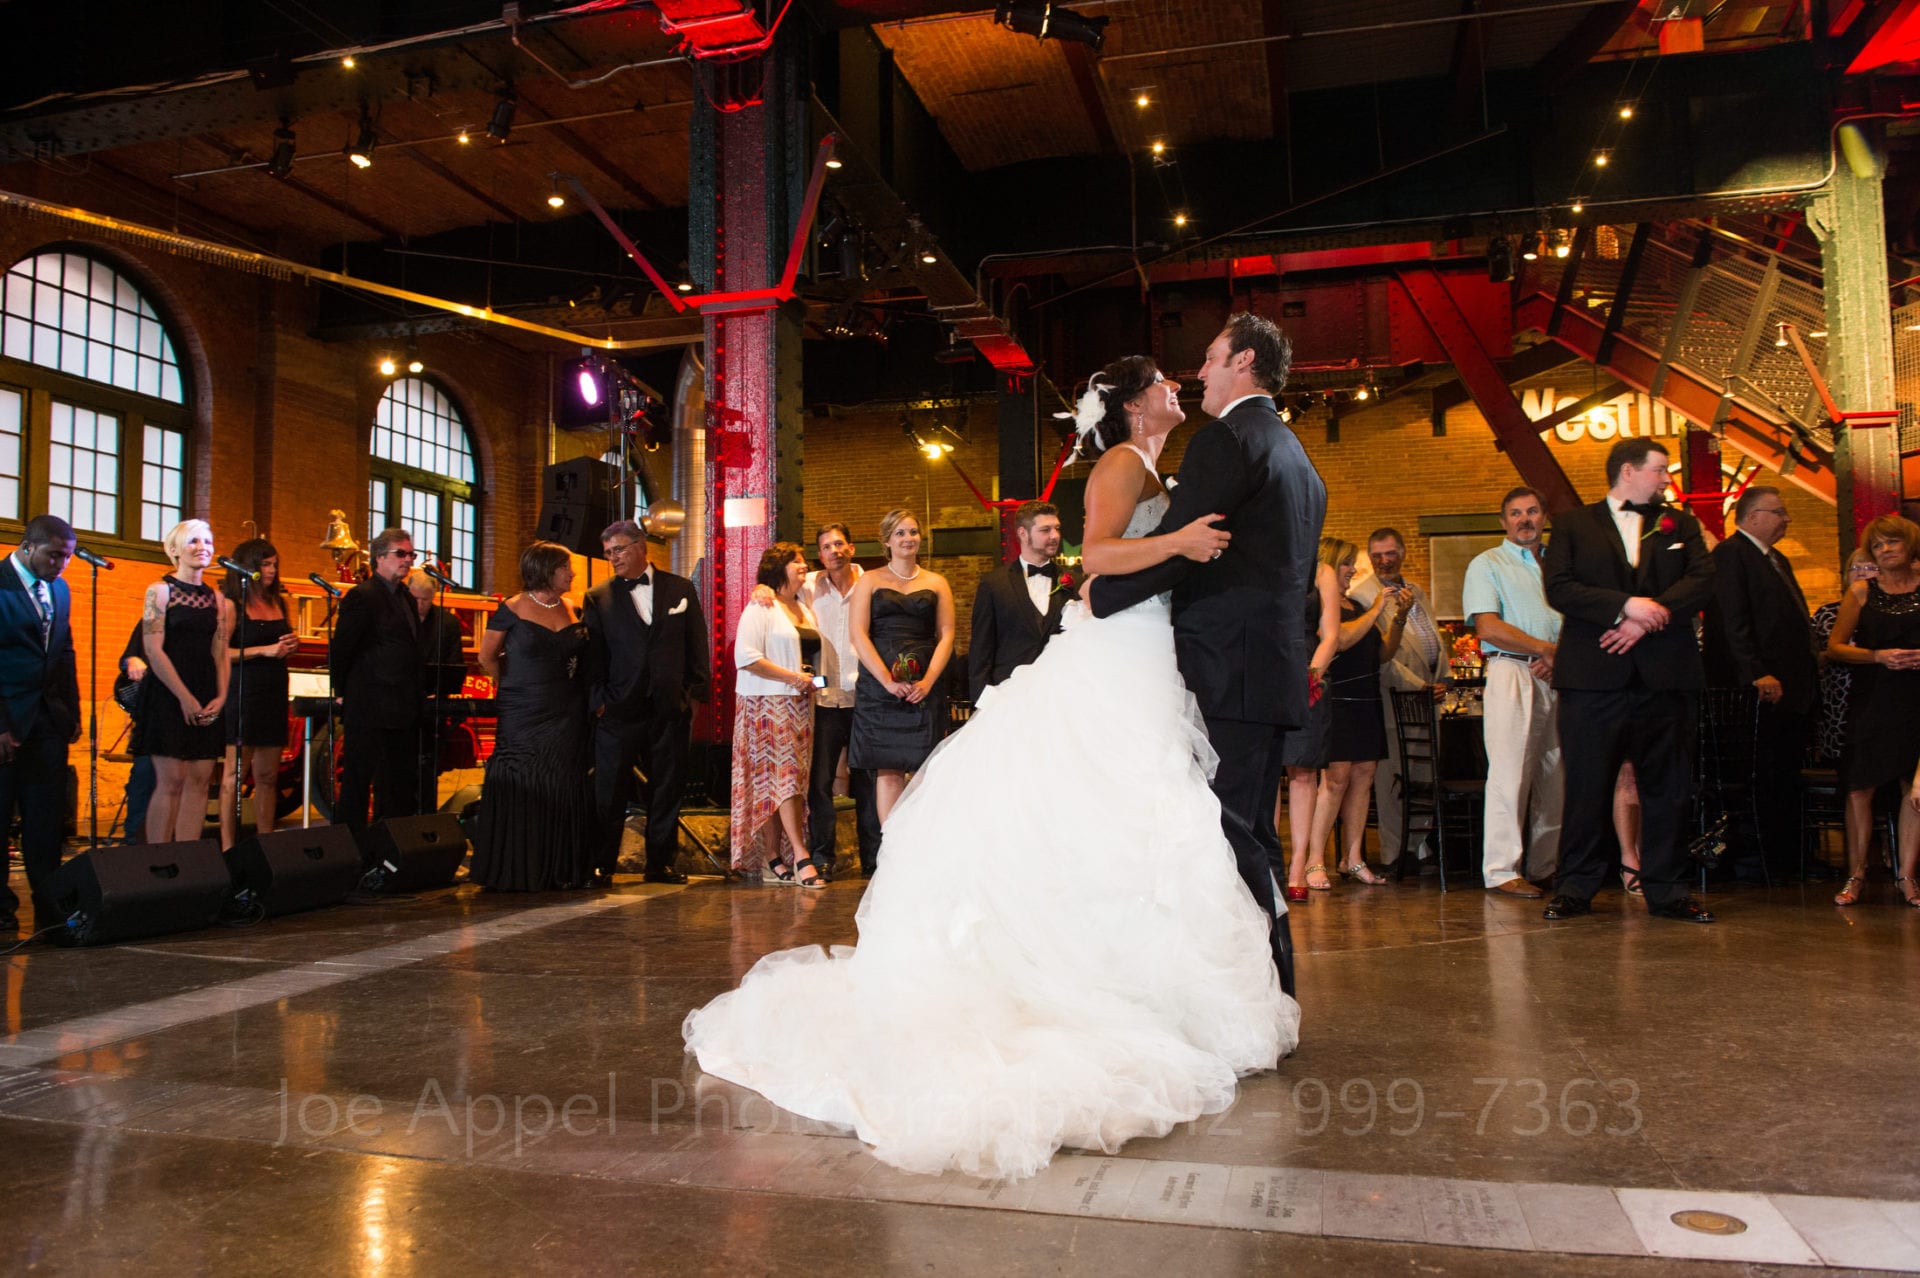 A couple dances, the bride wearing a puffy white dress the groom a black tuxedo in the Great Hall at the Heinz History Center.